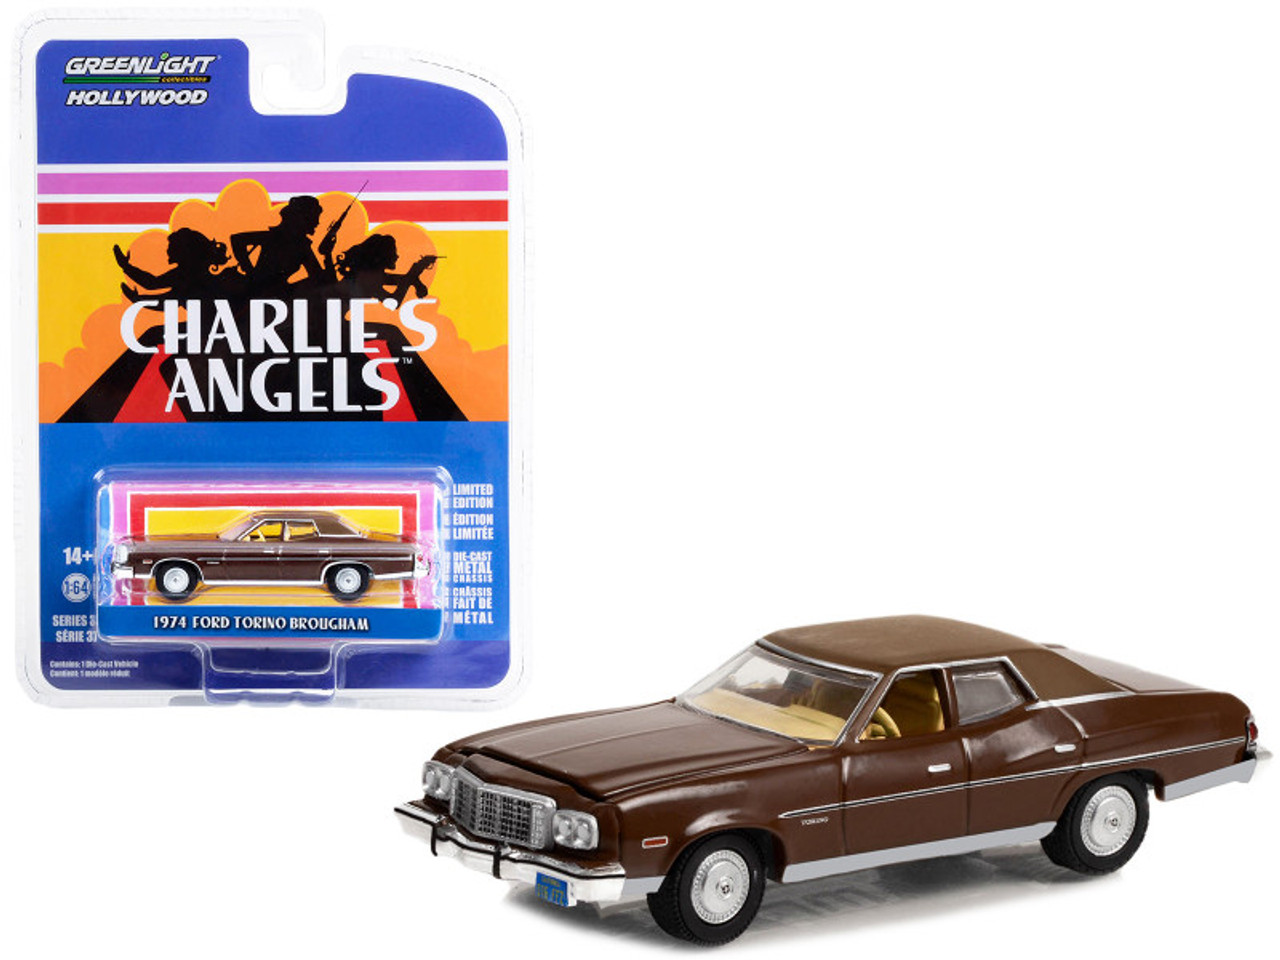 1974 Ford Gran Torino Brougham Brown with Tan Top "Charlie's Angels" (1976-1981) TV Series "Hollywood Series" Release 37 1/64 Diecast Model Car by Greenlight